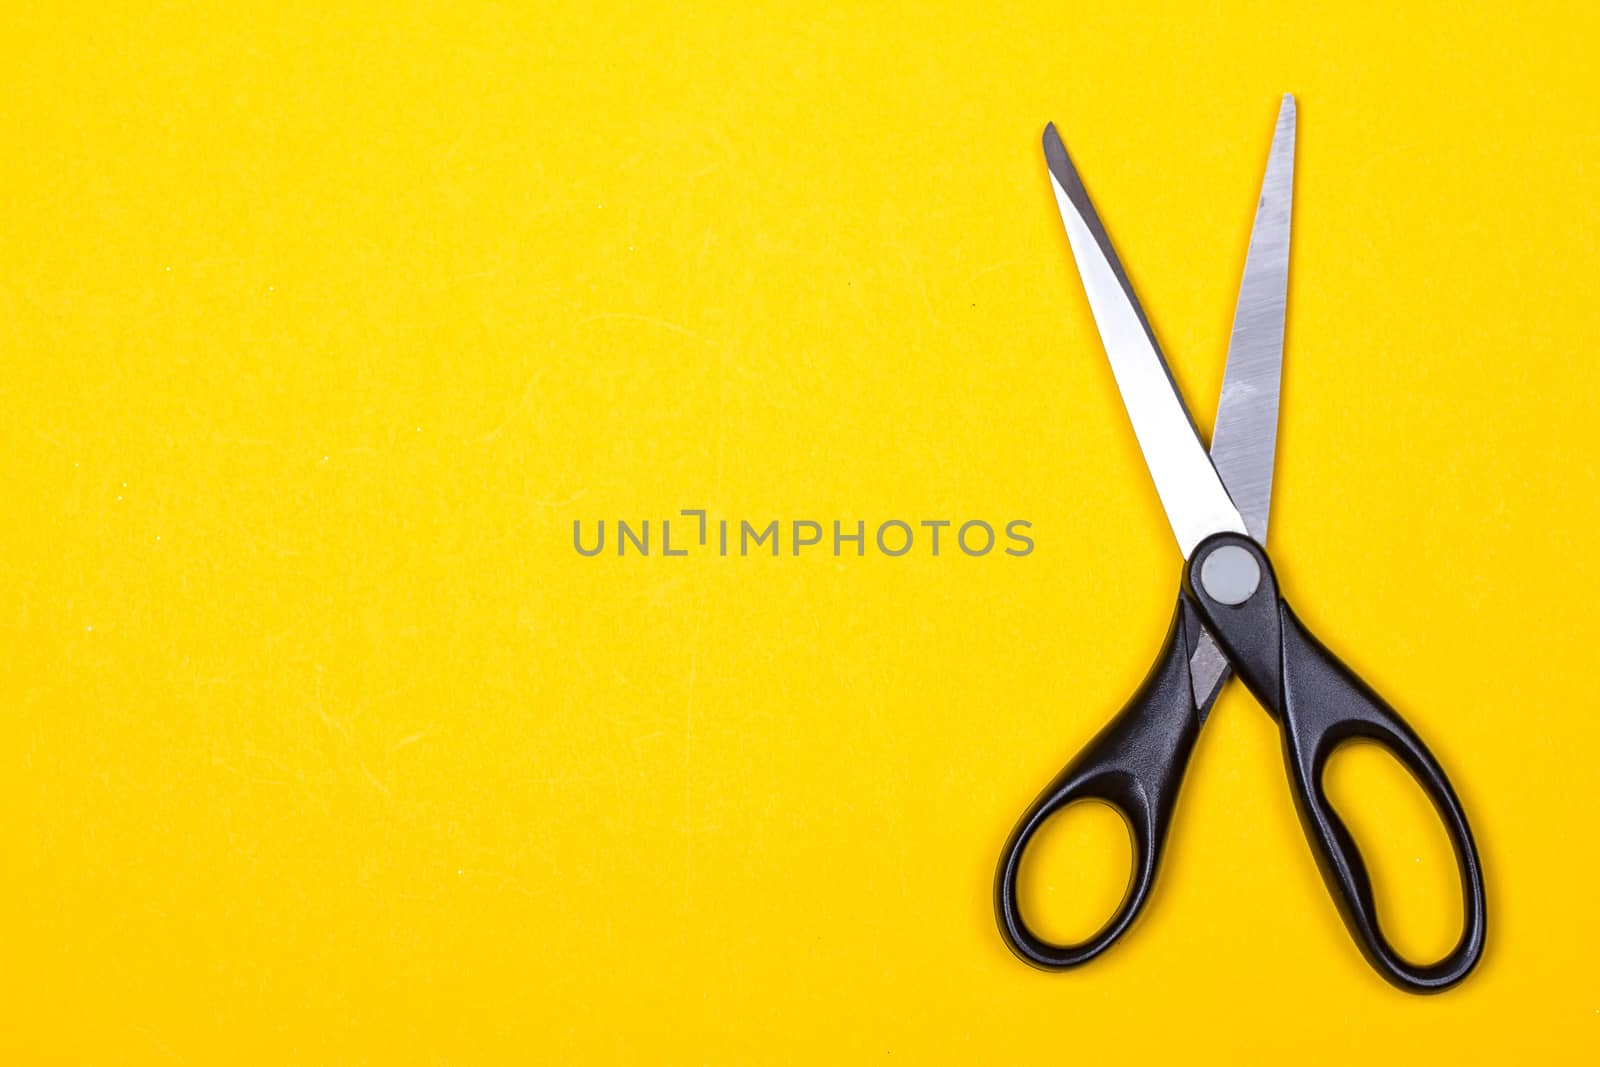 Black stationery scissors on a yellow background